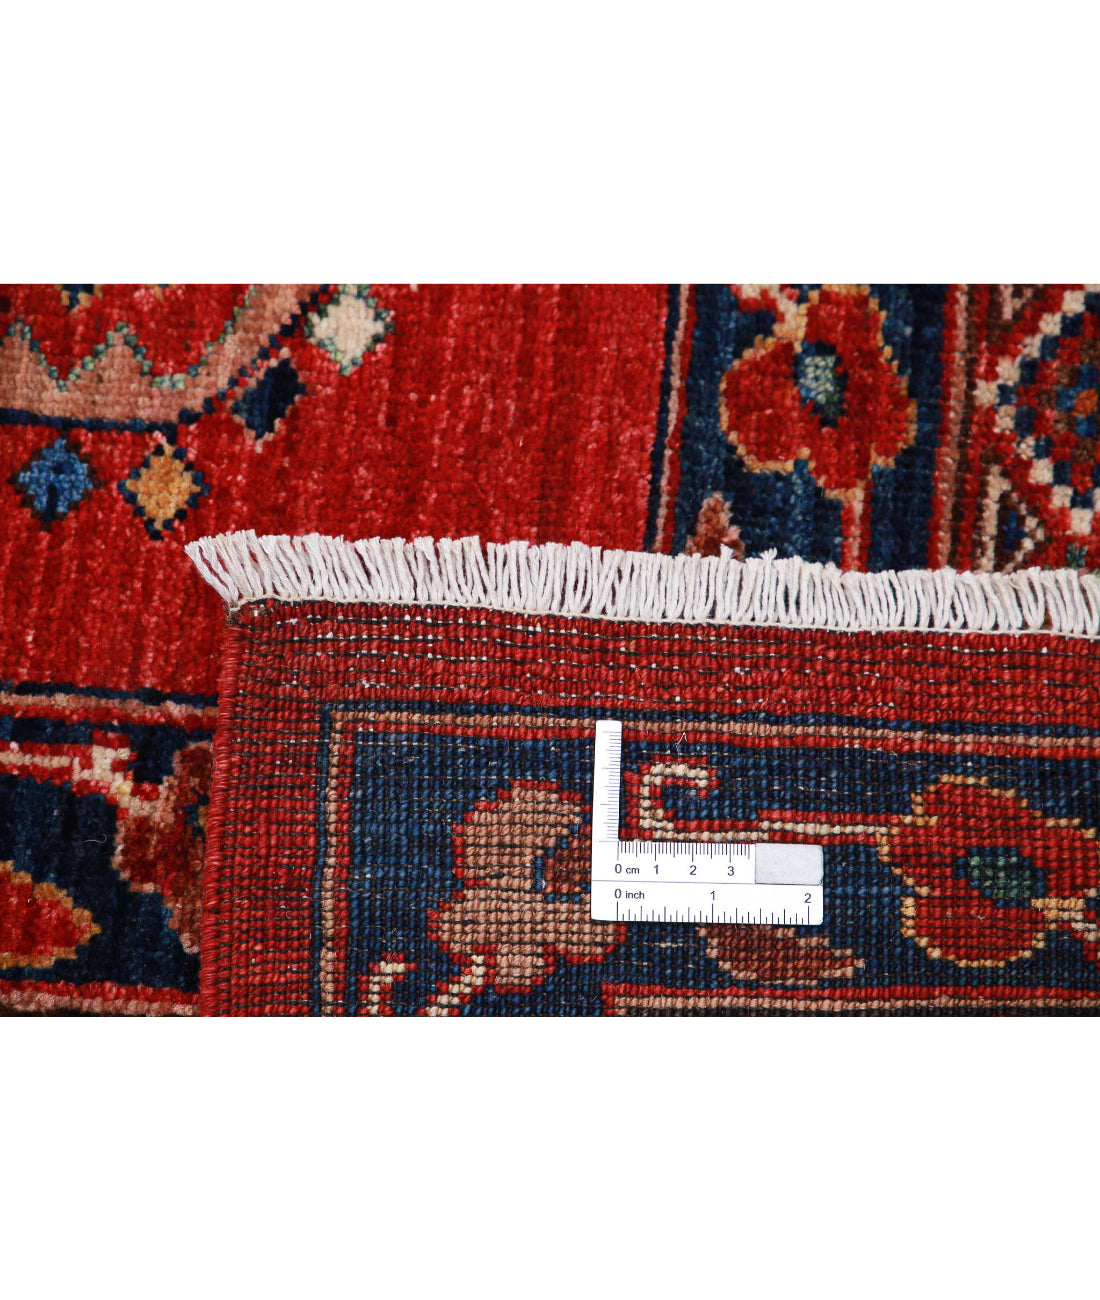 Hand Knotted Nomadic Caucasian Humna Wool Rug - 13'3'' x 16'7'' 13'3'' x 16'7'' (398 X 498) / Red / Blue